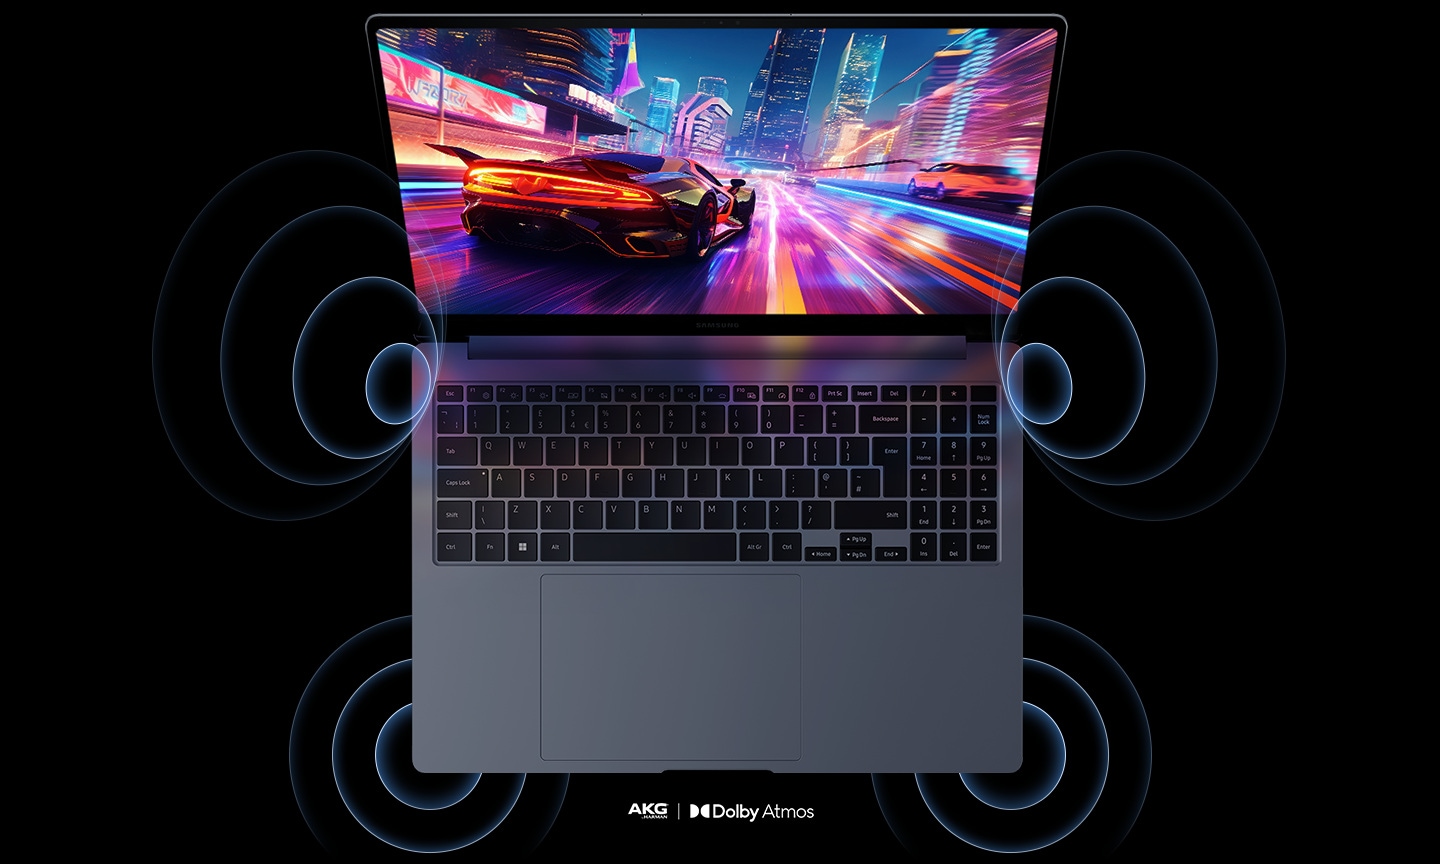 Top view of Galaxy Book4 Ultra, open and facing forward with a racing game shown onscreen and sound waves coming out of the four speakers. AKG by Harman and Dolby Atmos logos are shown.